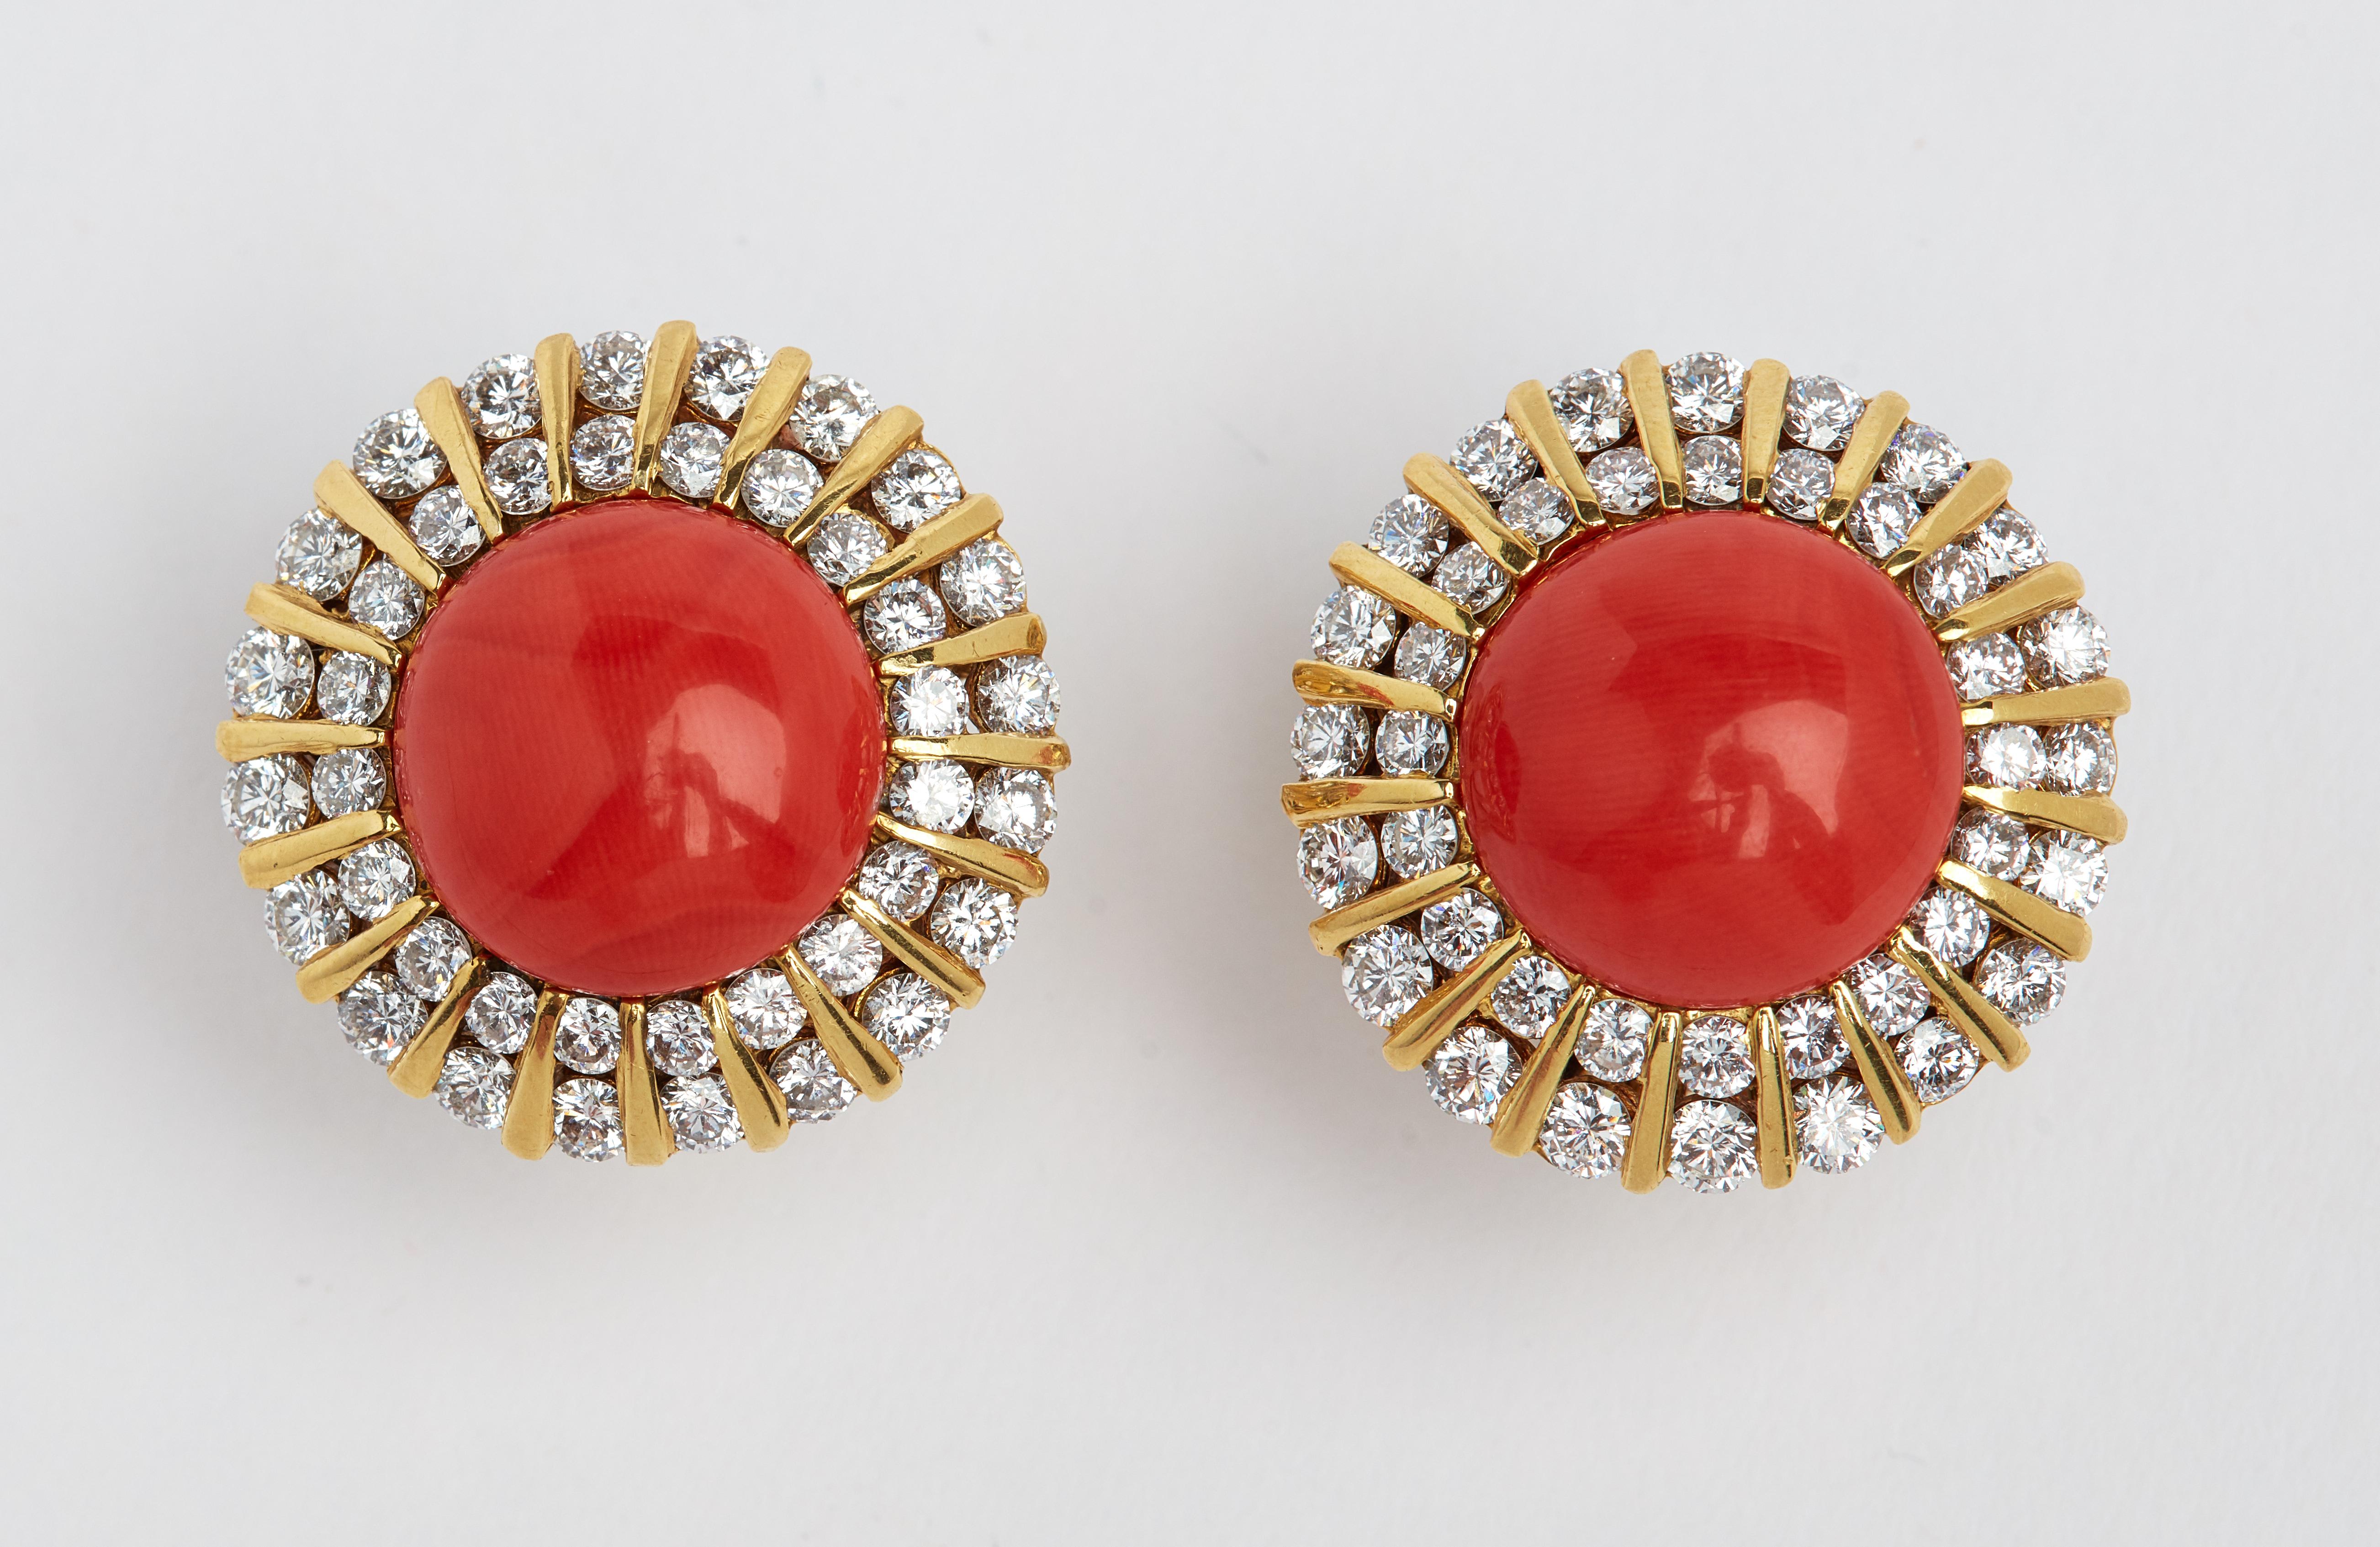 Very Fine Coral and Diamond Earrings. 18K Yellow gold. 80 diamonds. approximately 5.50 carats total weight. Exceptionally gem quality diamonds 